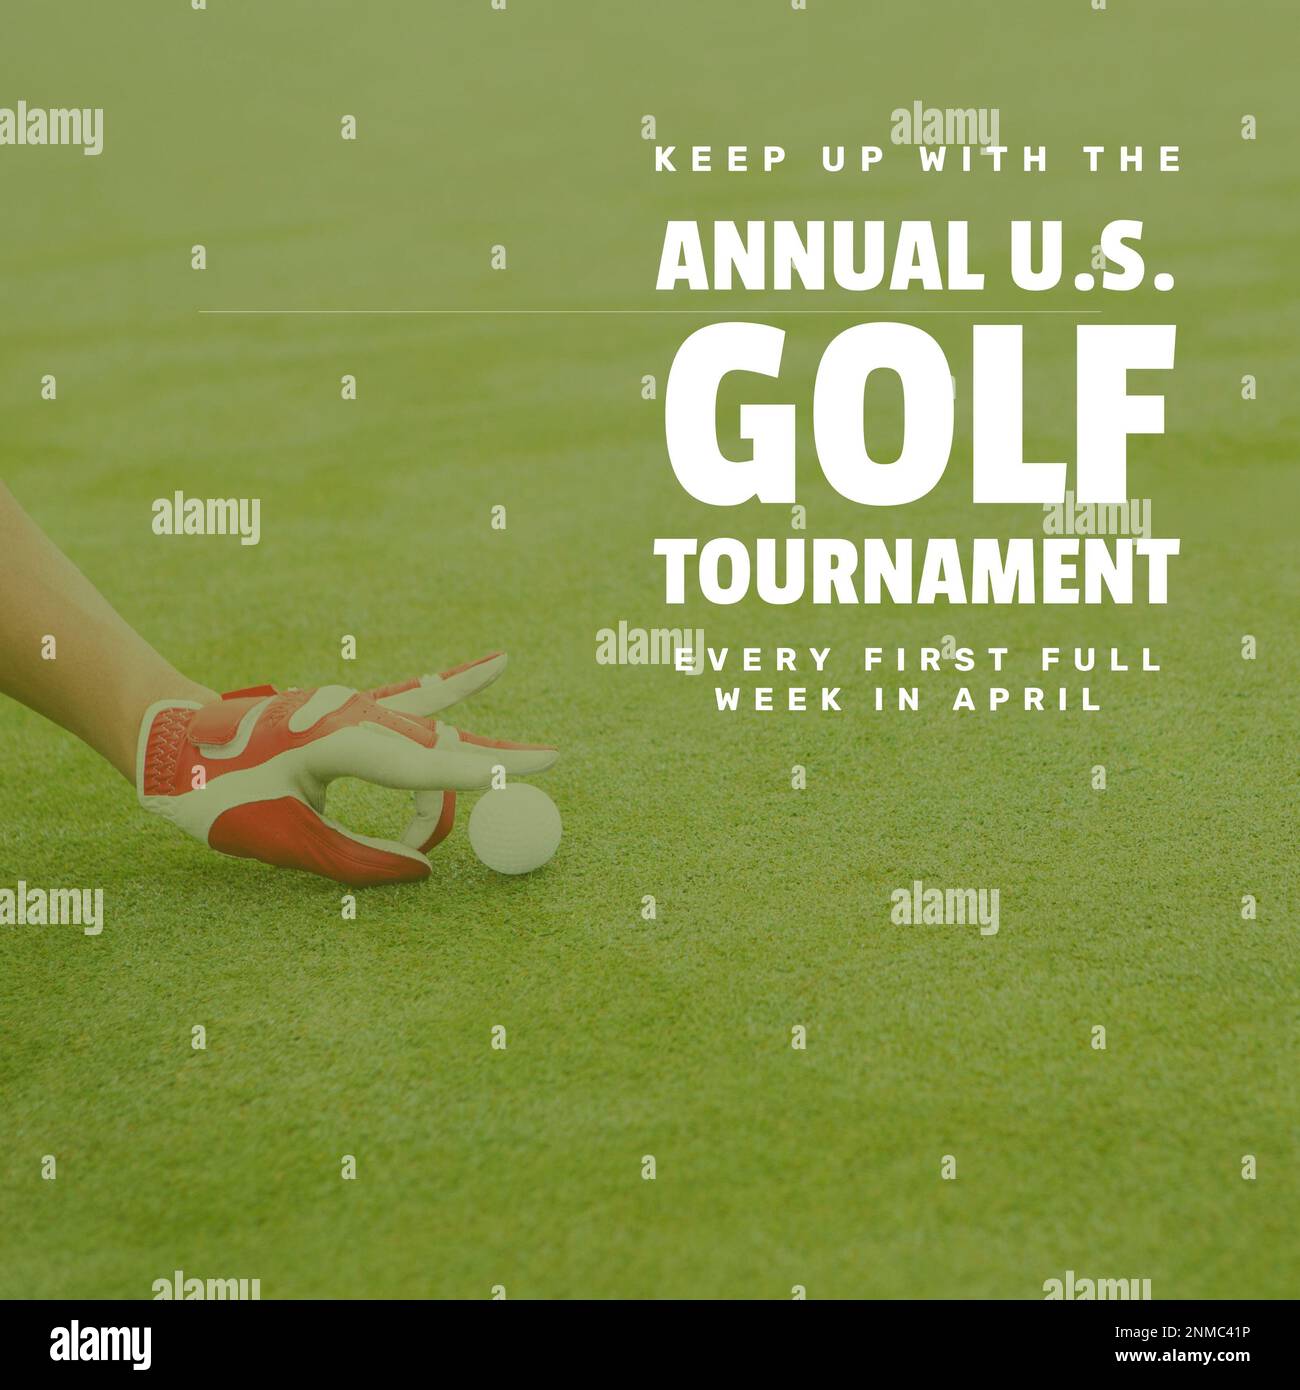 Image of annual us golf tournament text over hand flicking golf ball on golf course Stock Photo